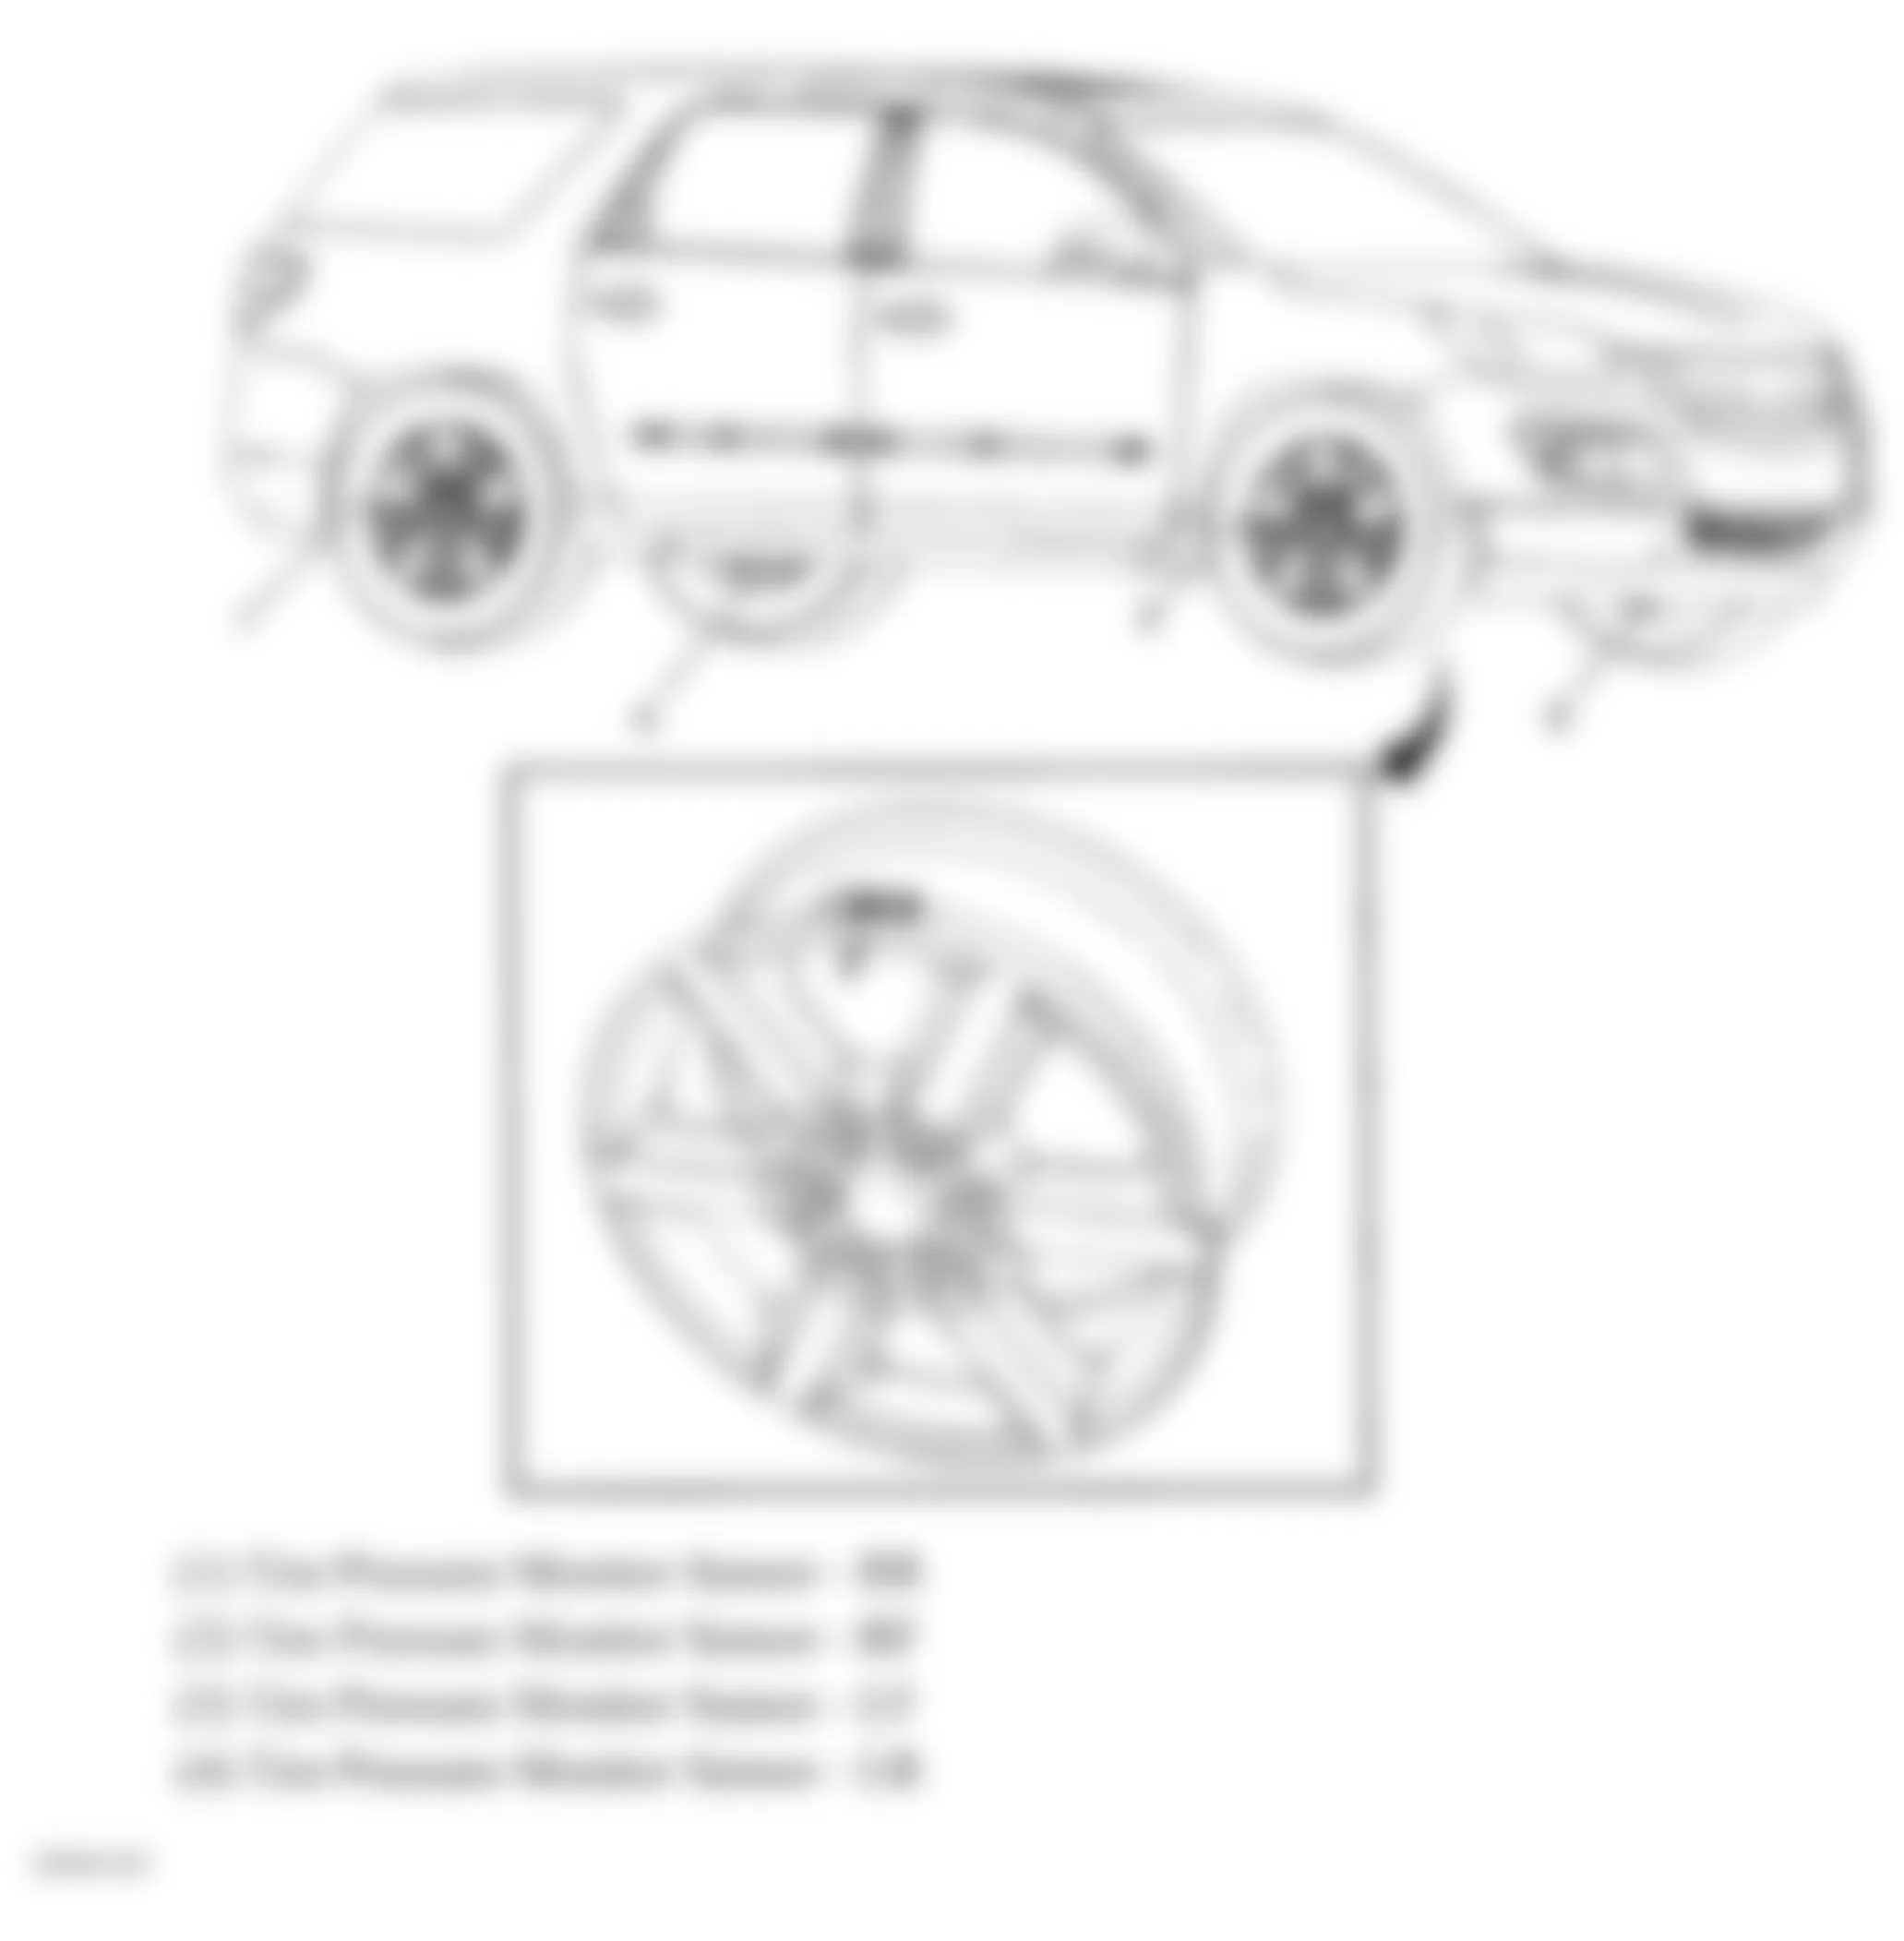 Buick Enclave CXL 2010 - Component Locations -  Vehicle Tire Overview